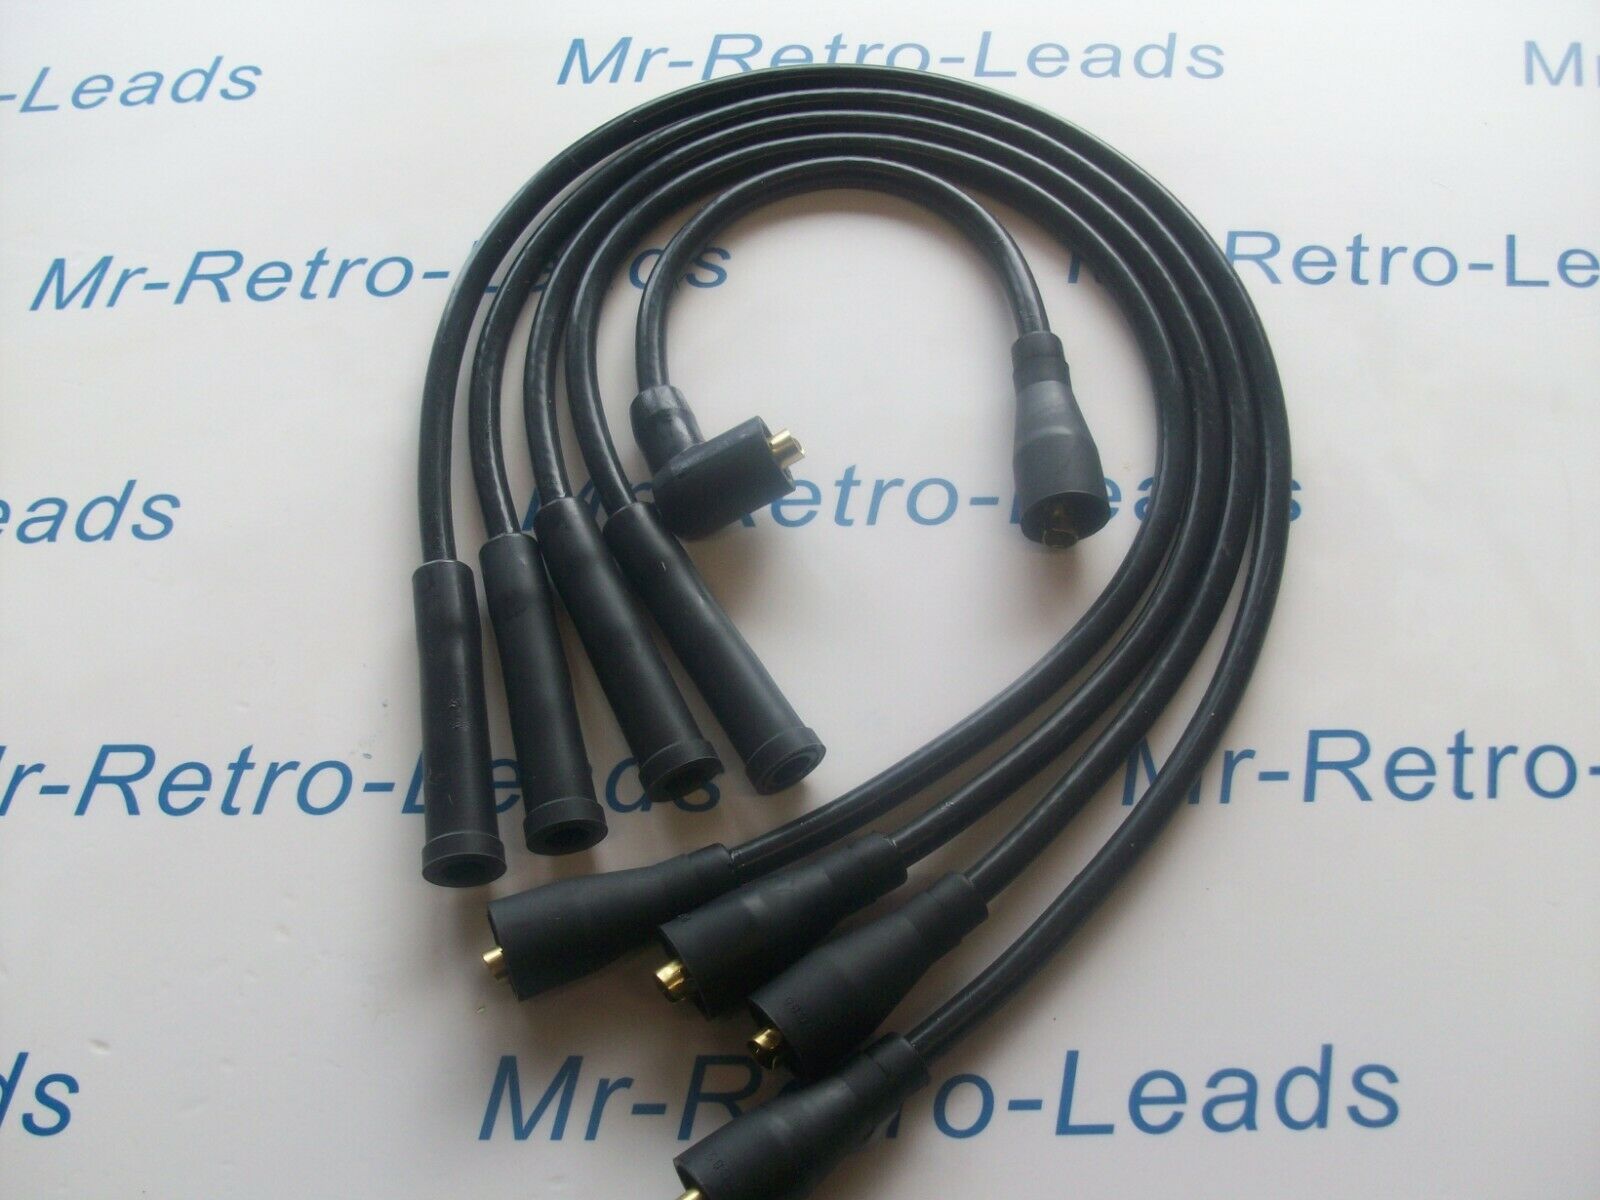 Black 8mm Performance Ignition Leads Ford Pinto 4 Cylinder Hand Built Quality